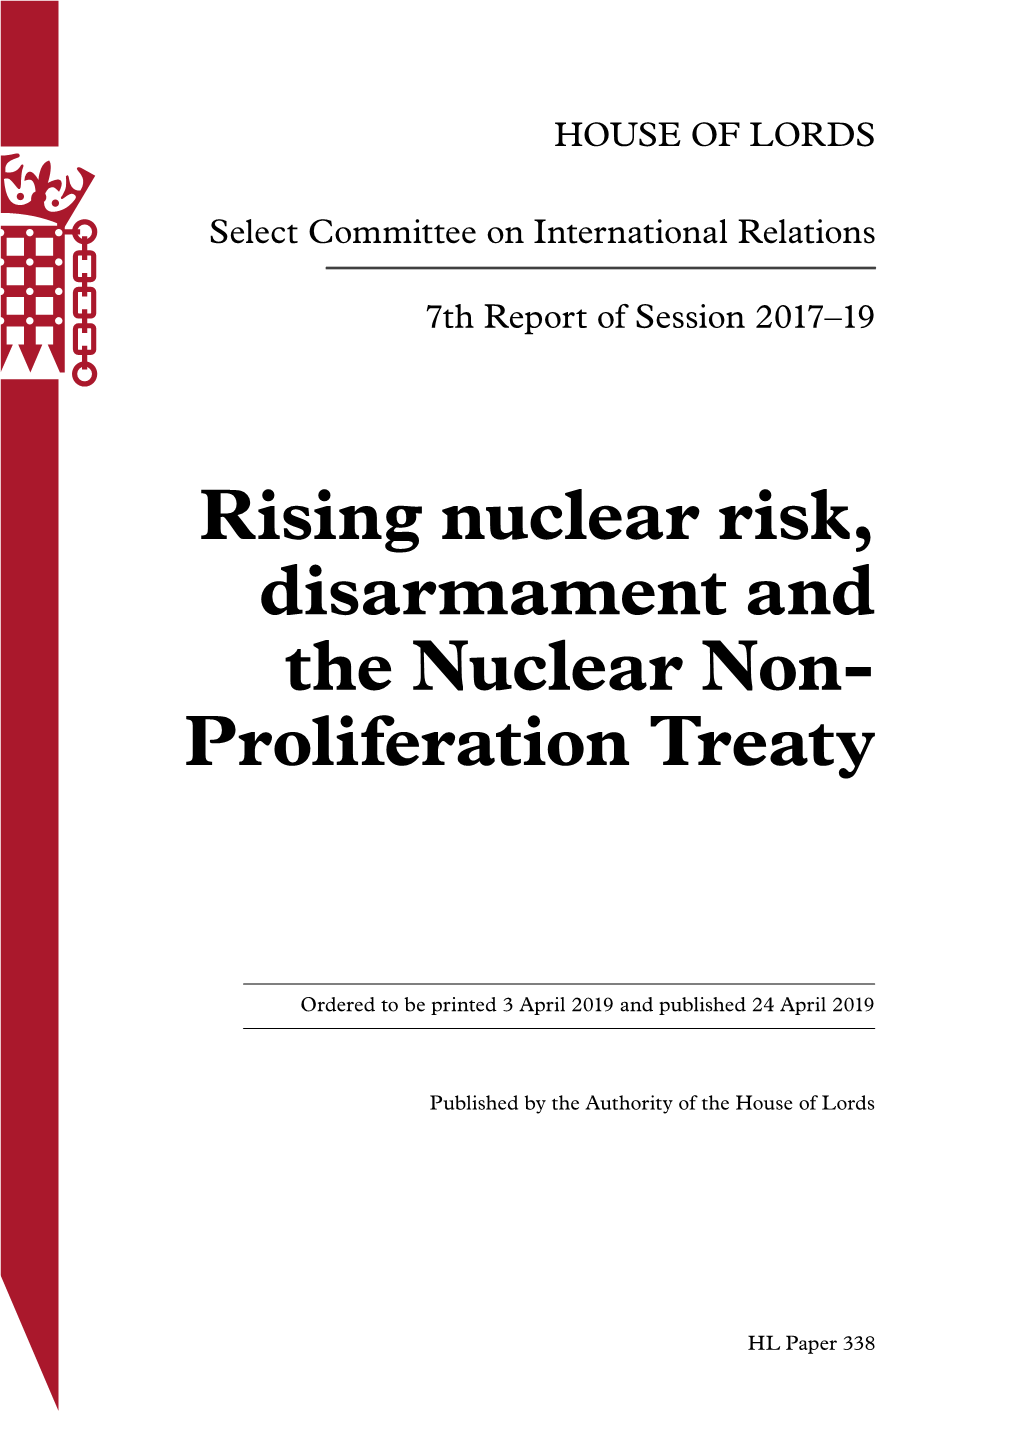 Rising Nuclear Risk, Disarmament and the Nuclear Non-Proliferation Treaty